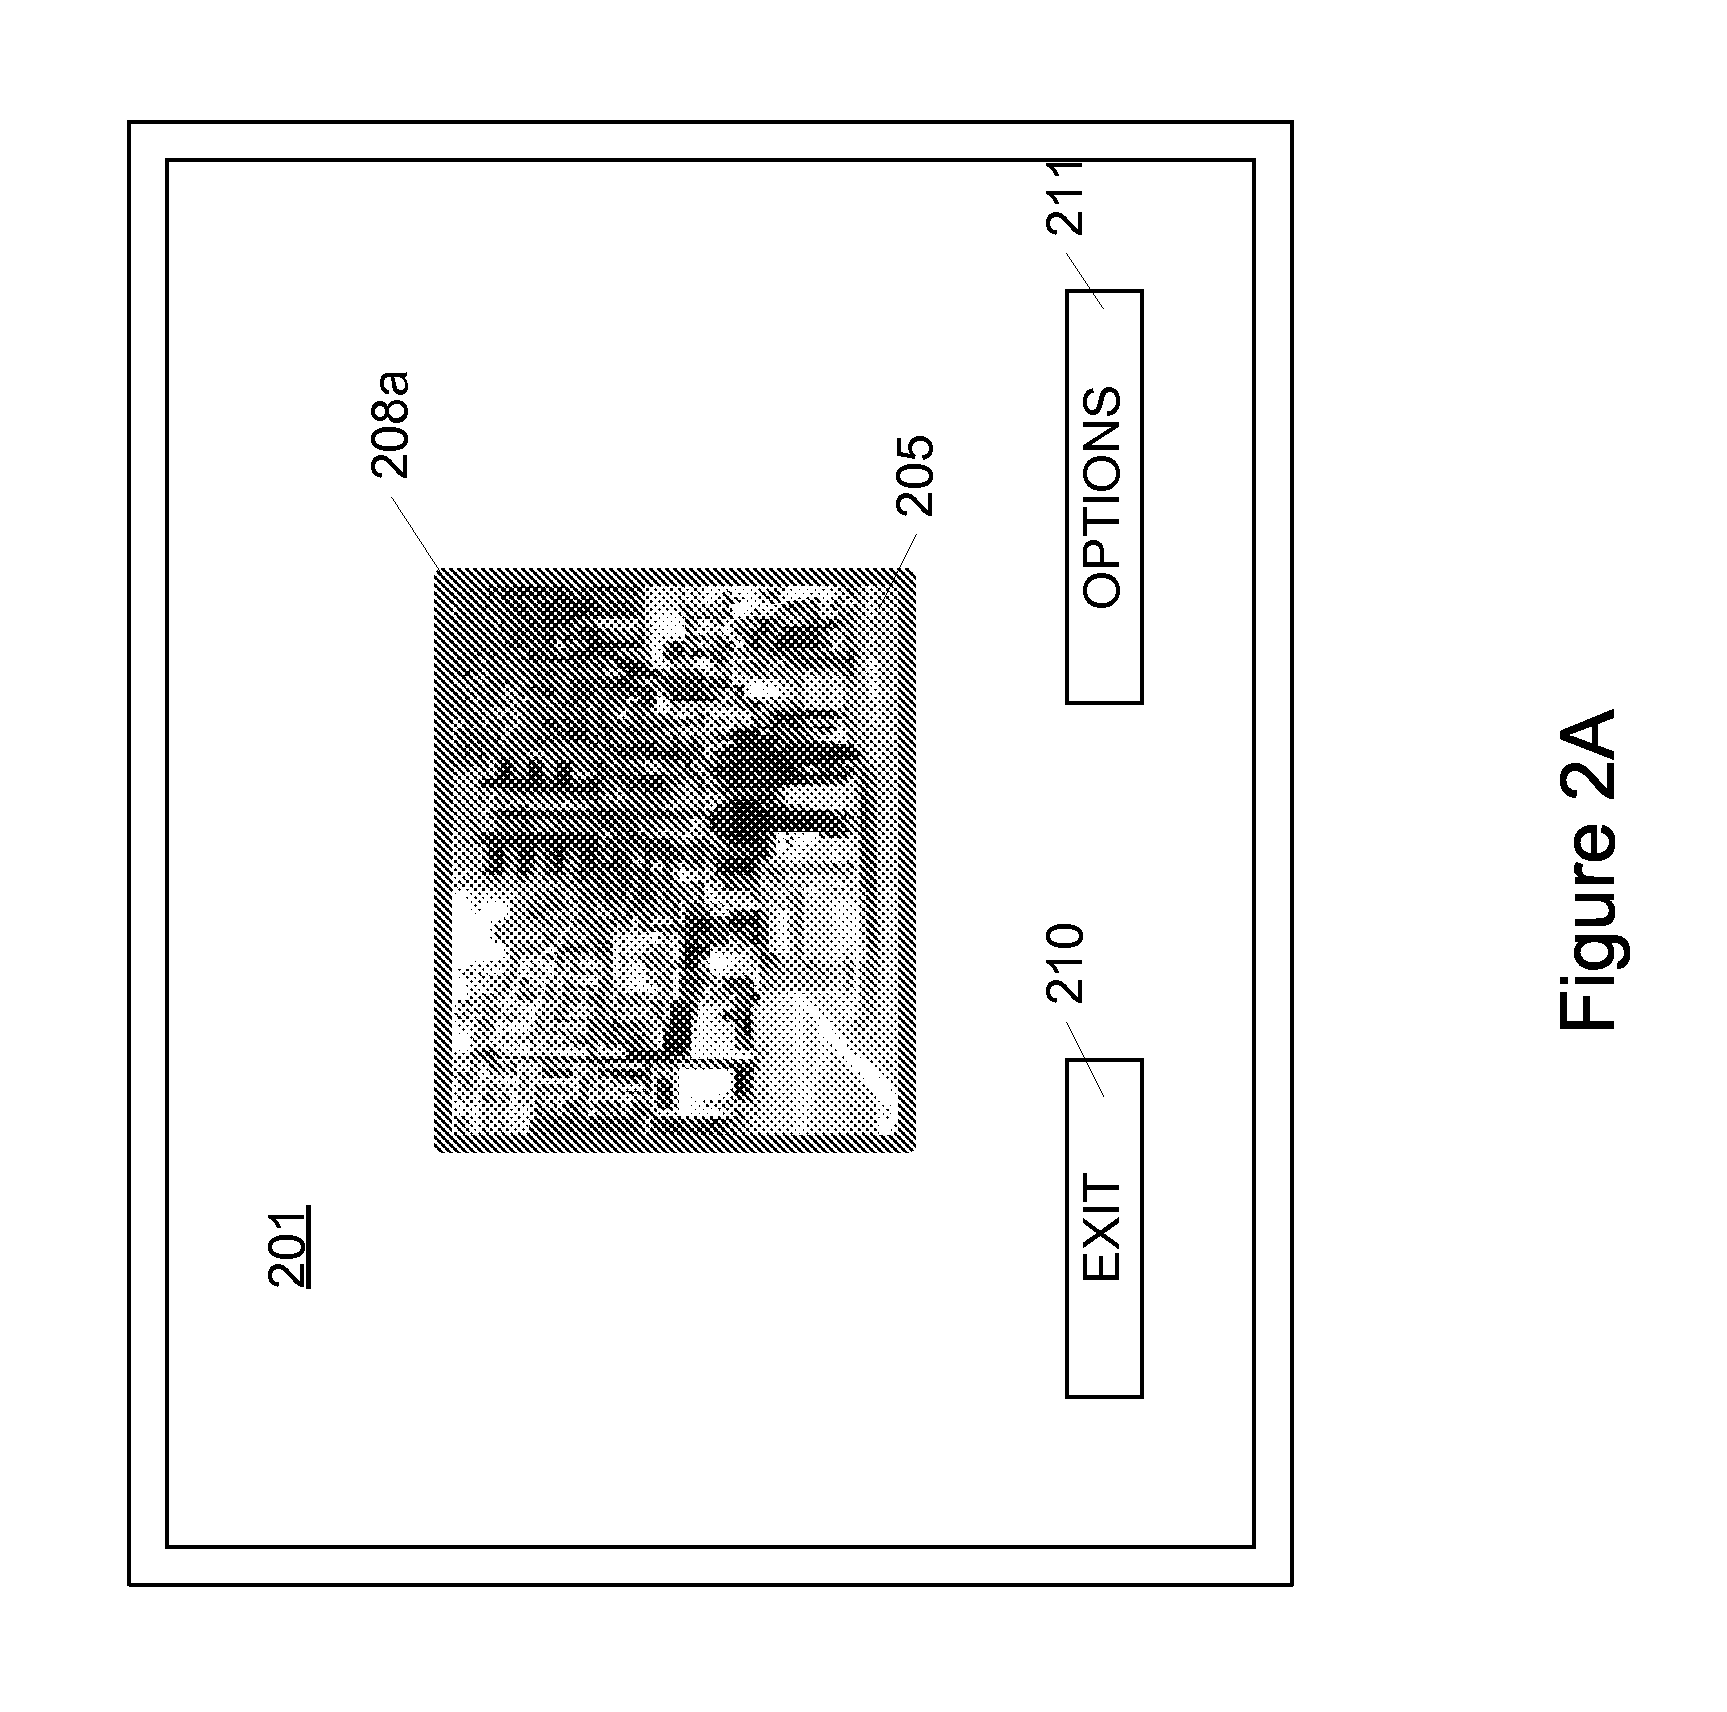 System and method for browsing an image database